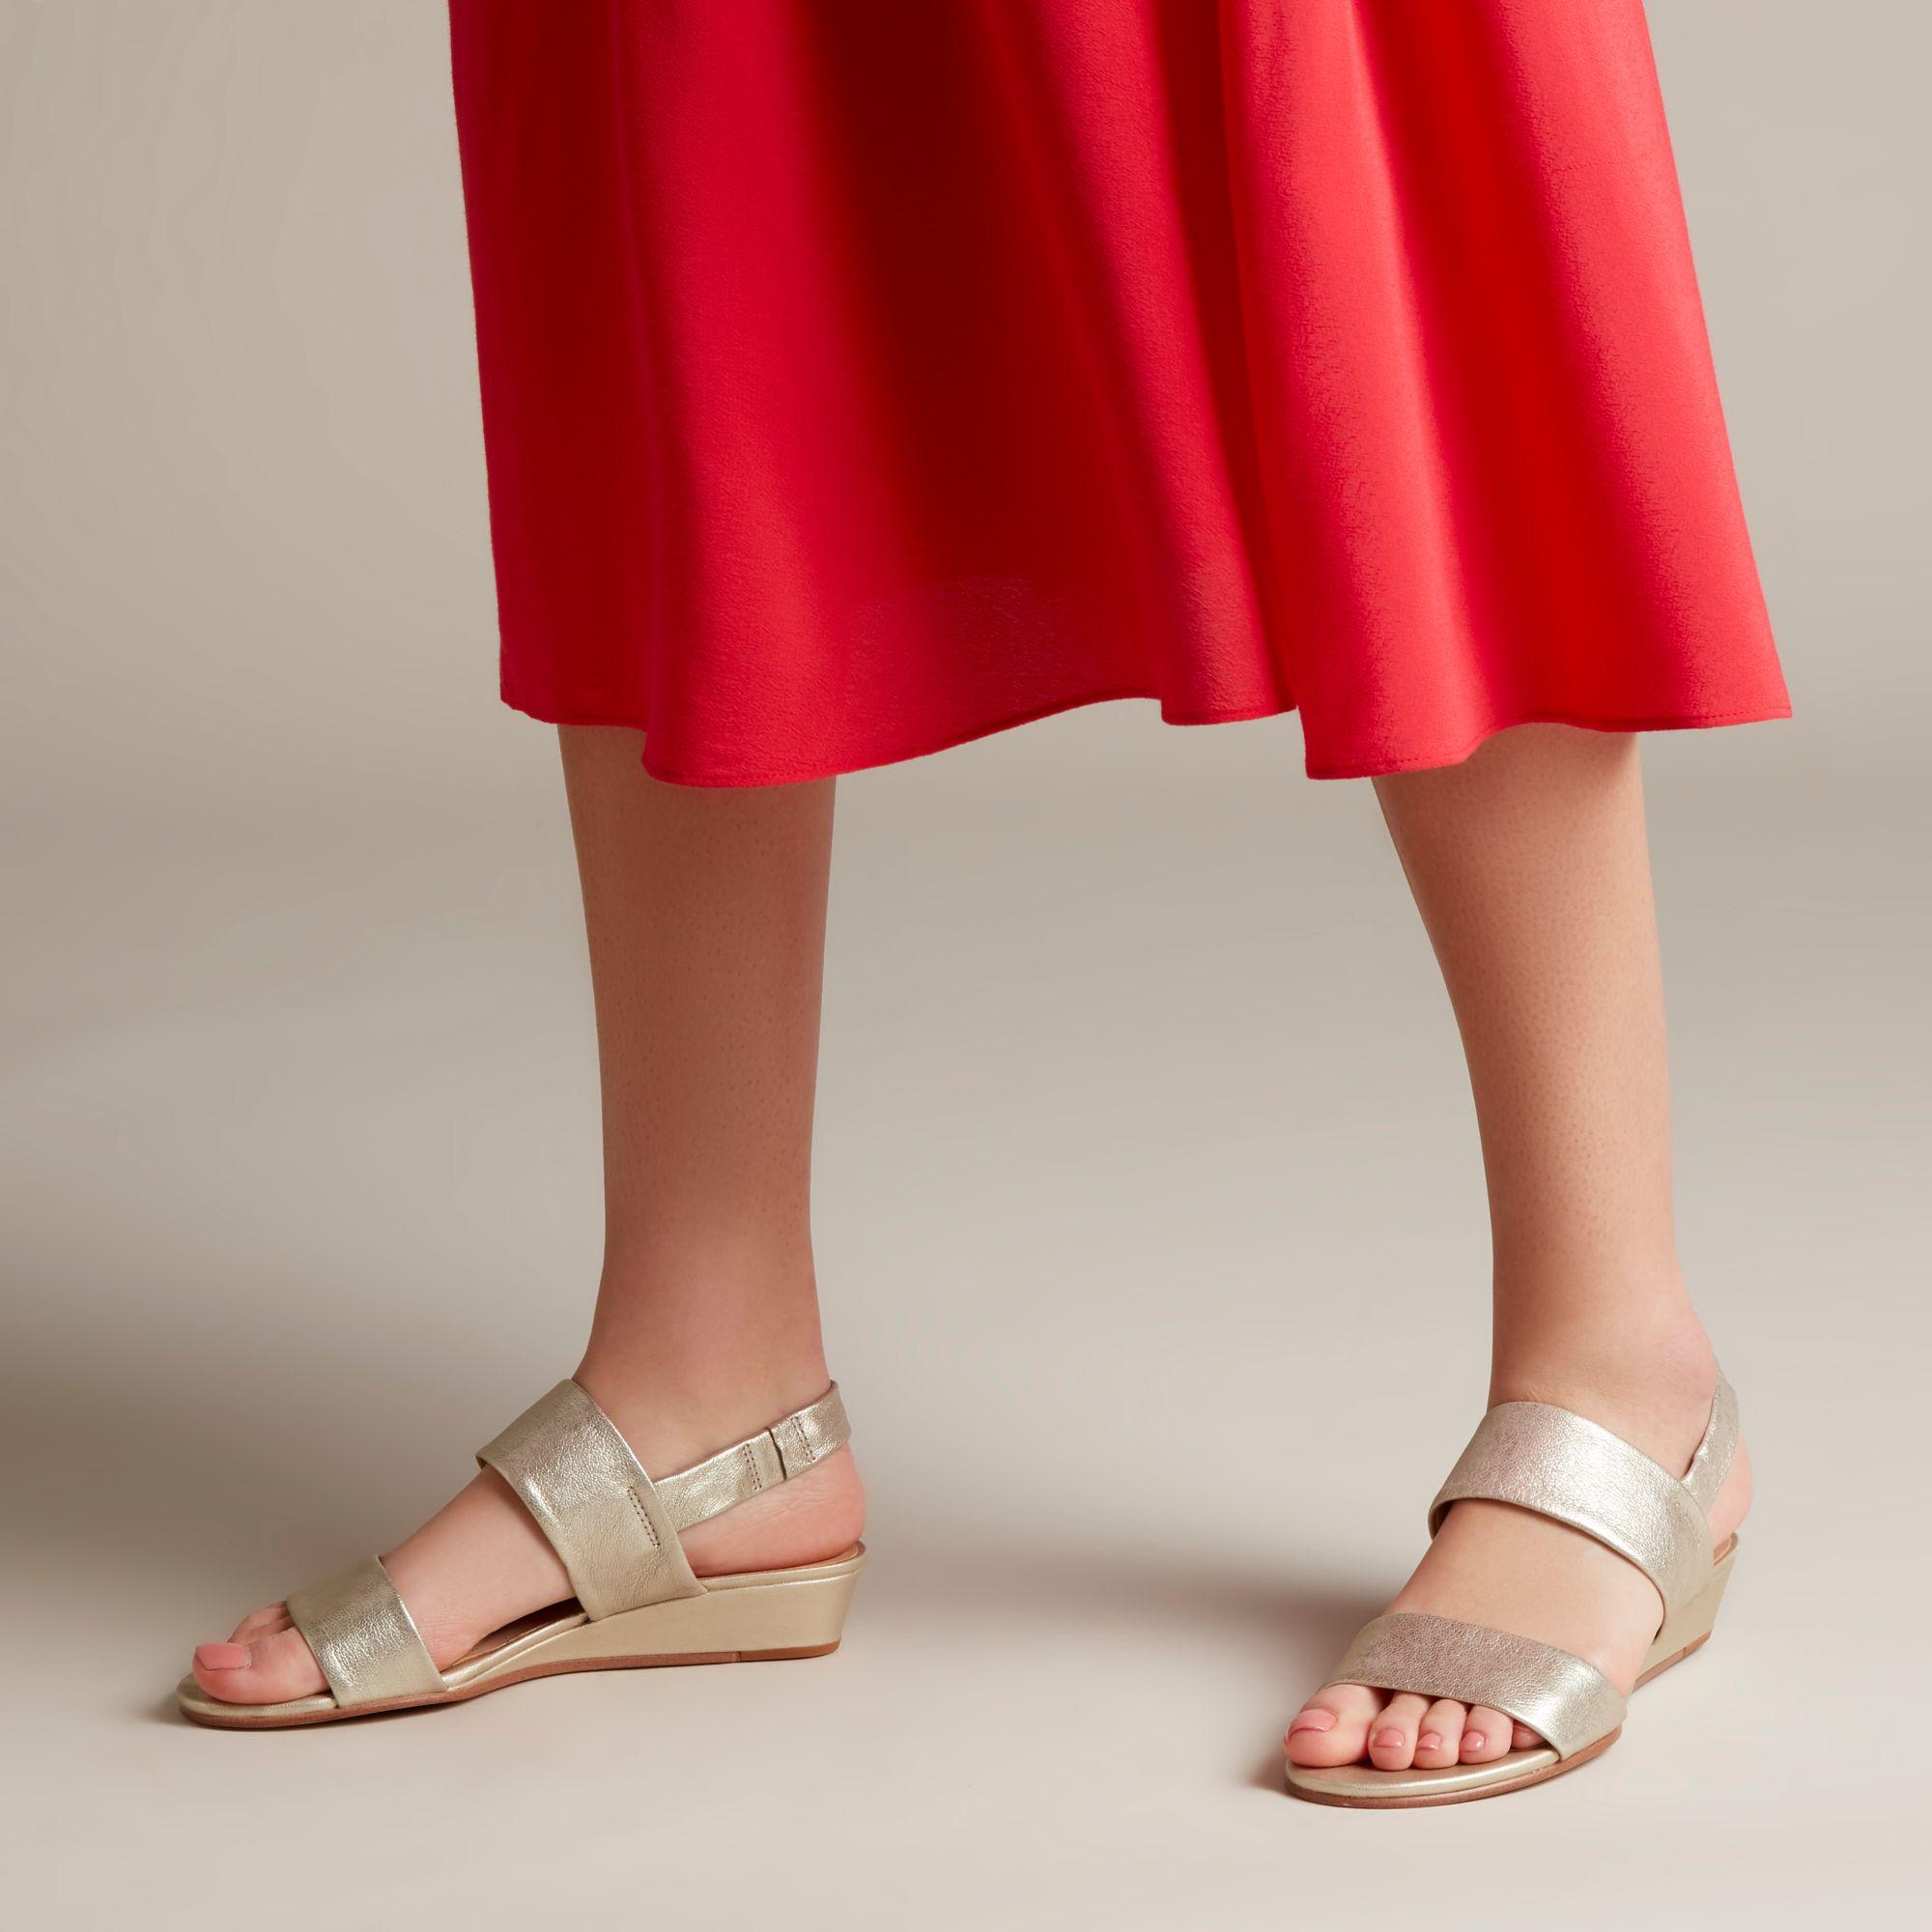 Clarks Sense Lily Sandals Luxembourg, SAVE 34% - lutheranems.com